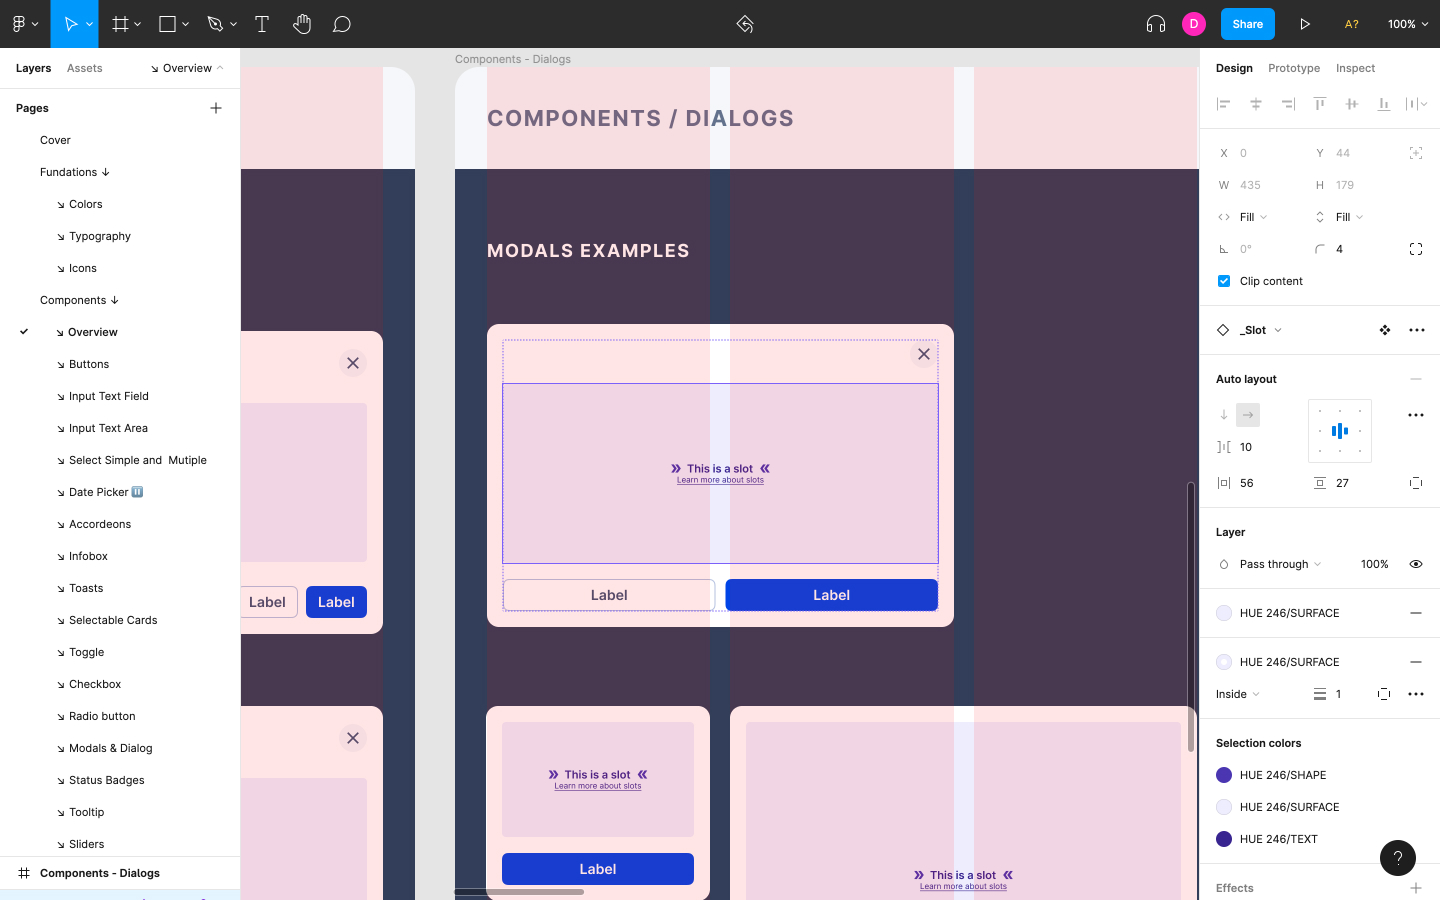 Mockup created with Figma, one of the best web design software tools